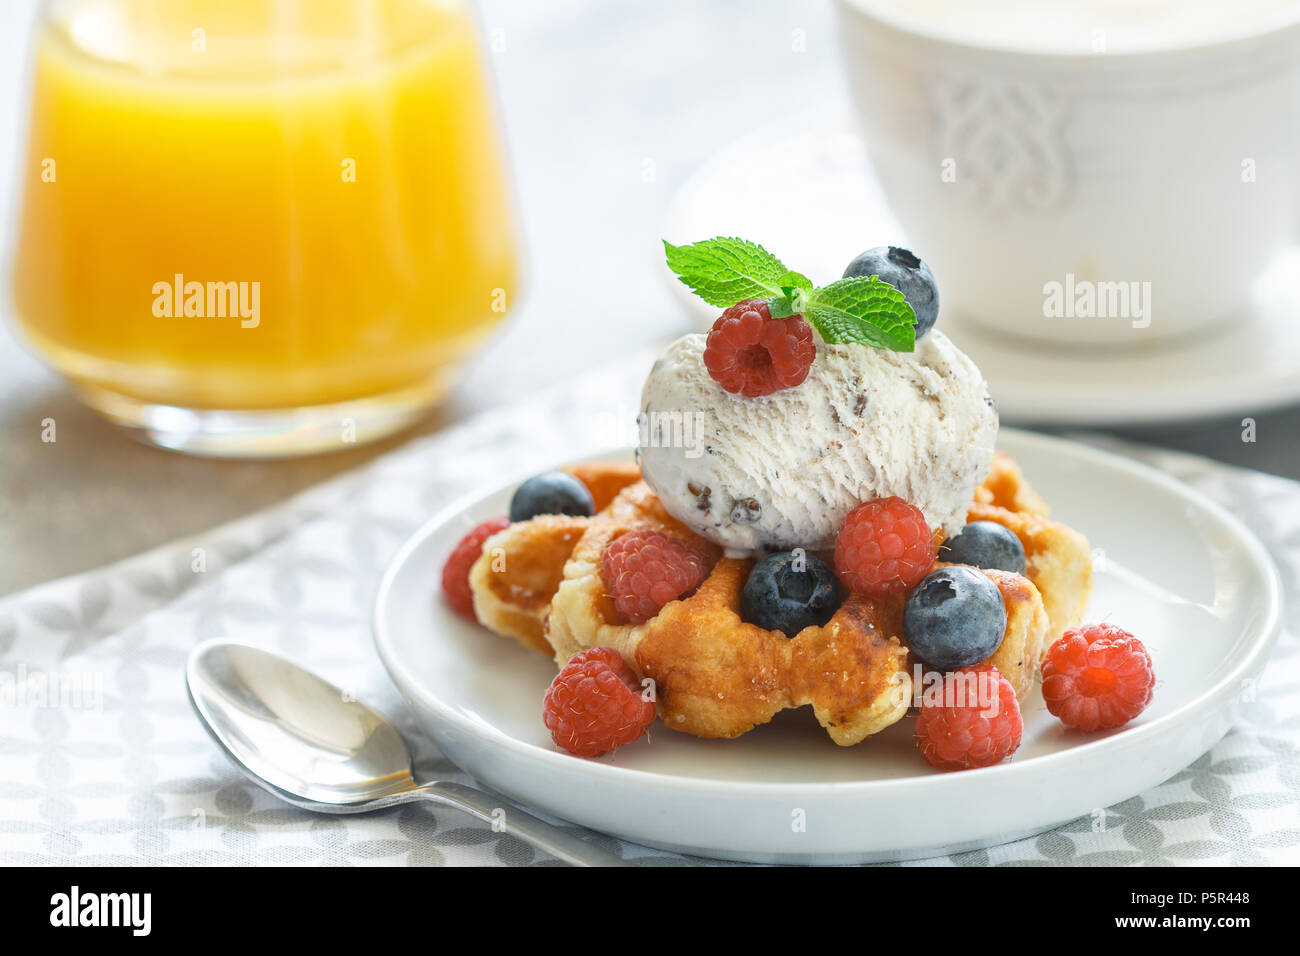 Homemade waffles with ice cream and fresh berries-raspberries, blueberries.  Delicious dessert, cappuccino and orange juice on the table. Selective foc  Stock Photo - Alamy